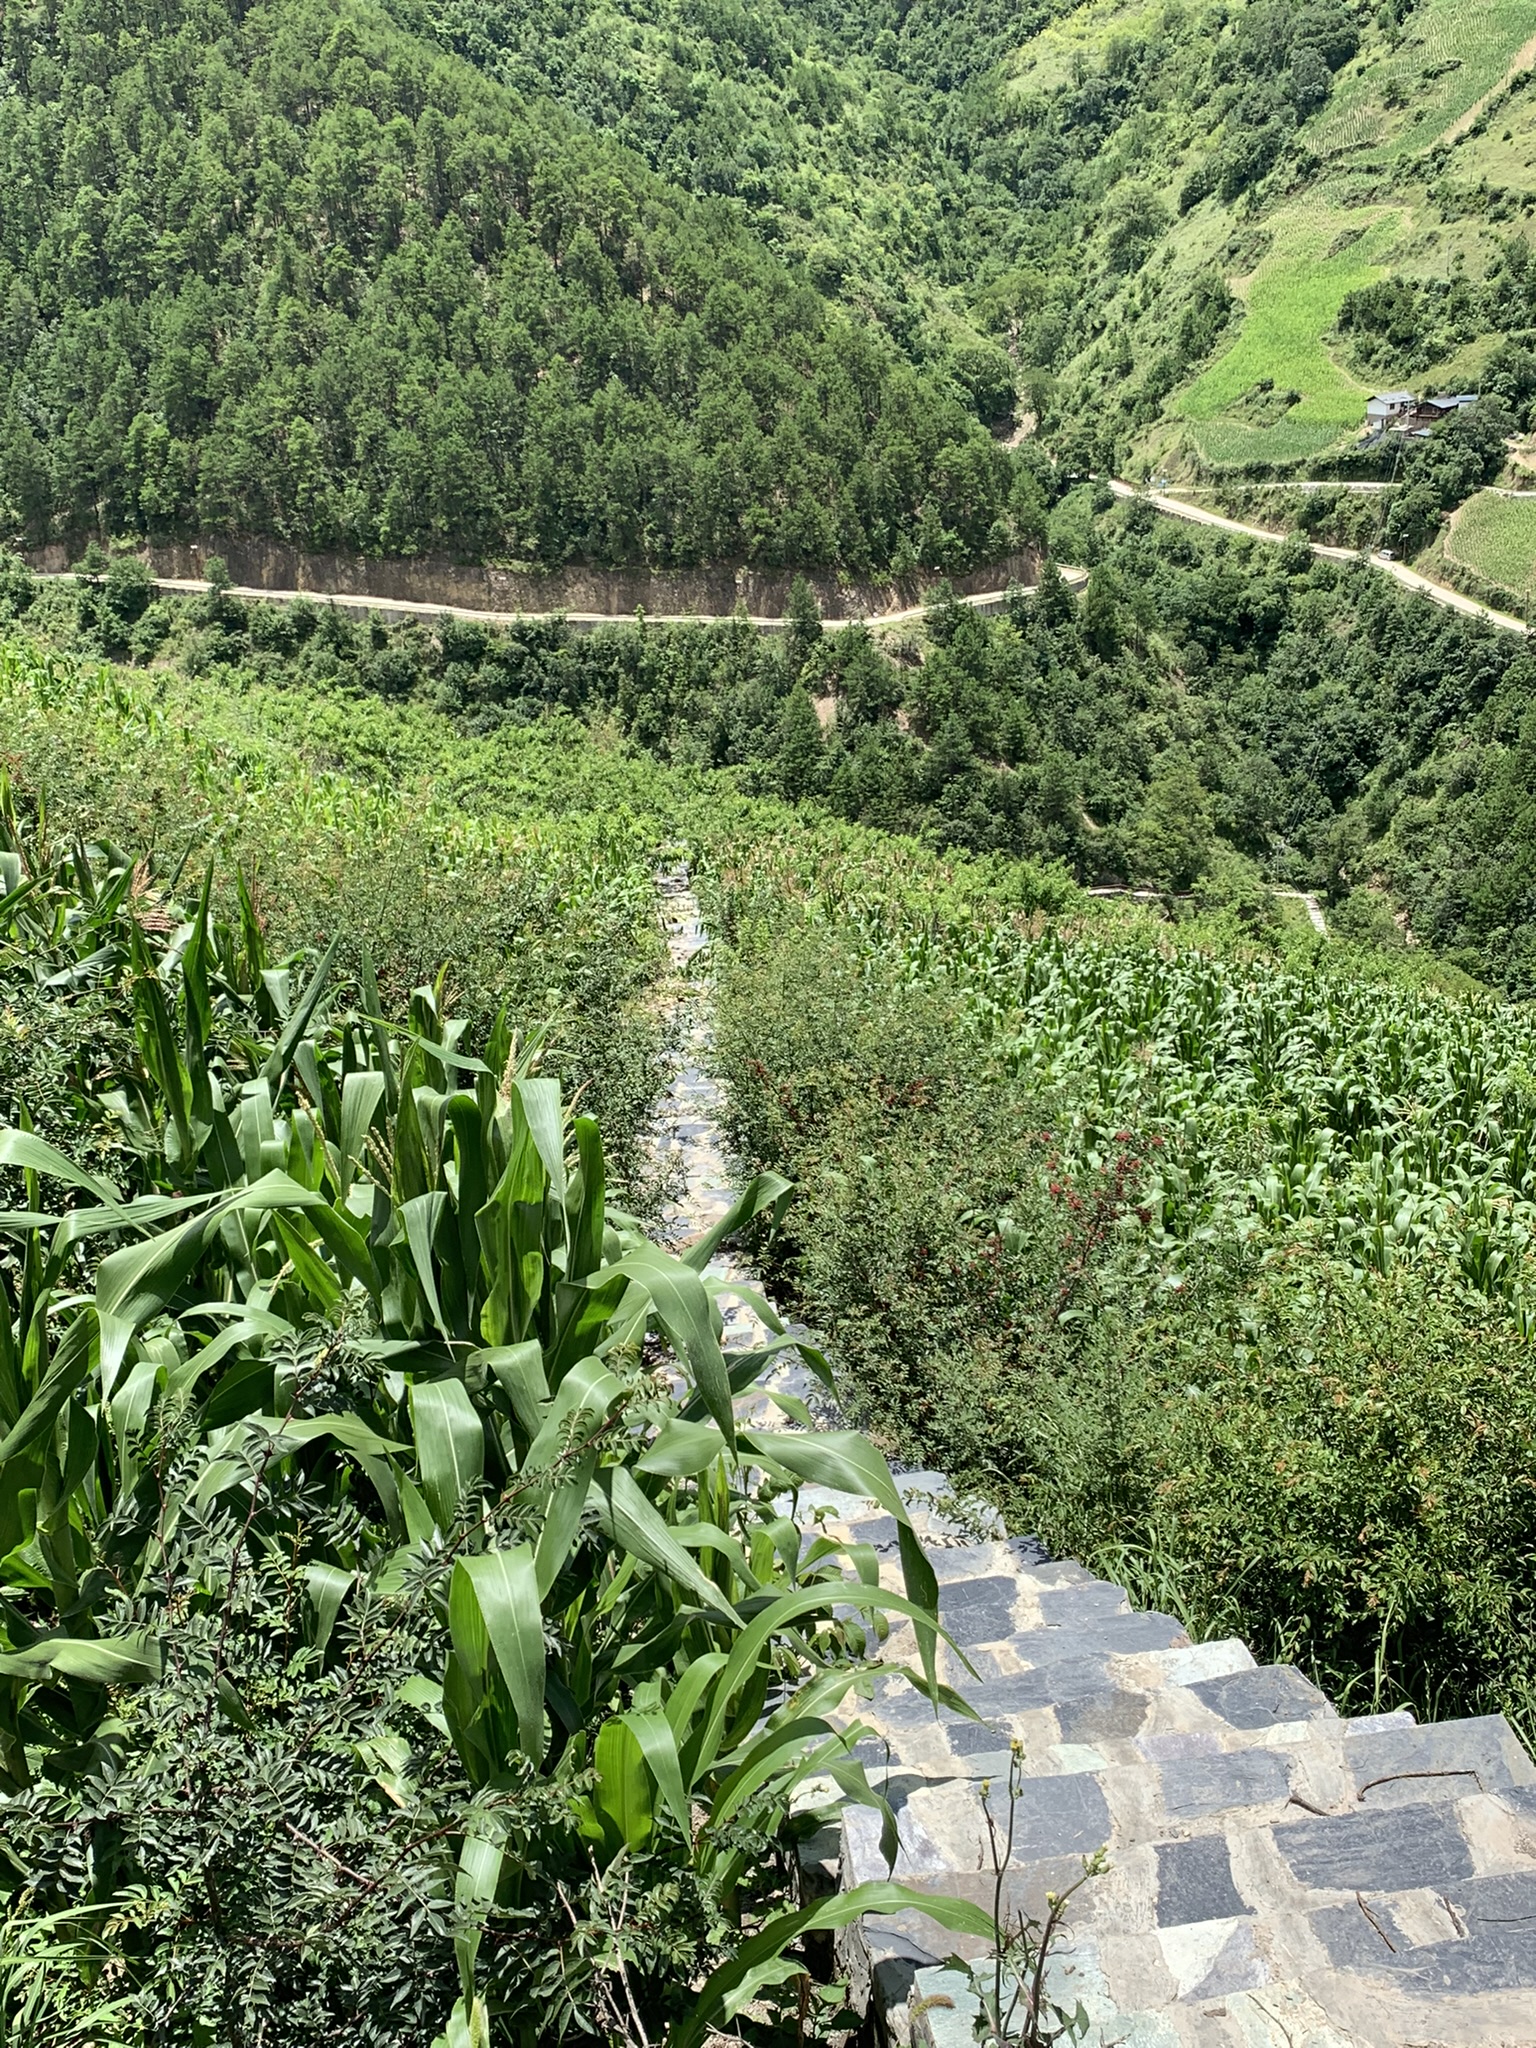 staircase looking down into fields planted on the mountainside